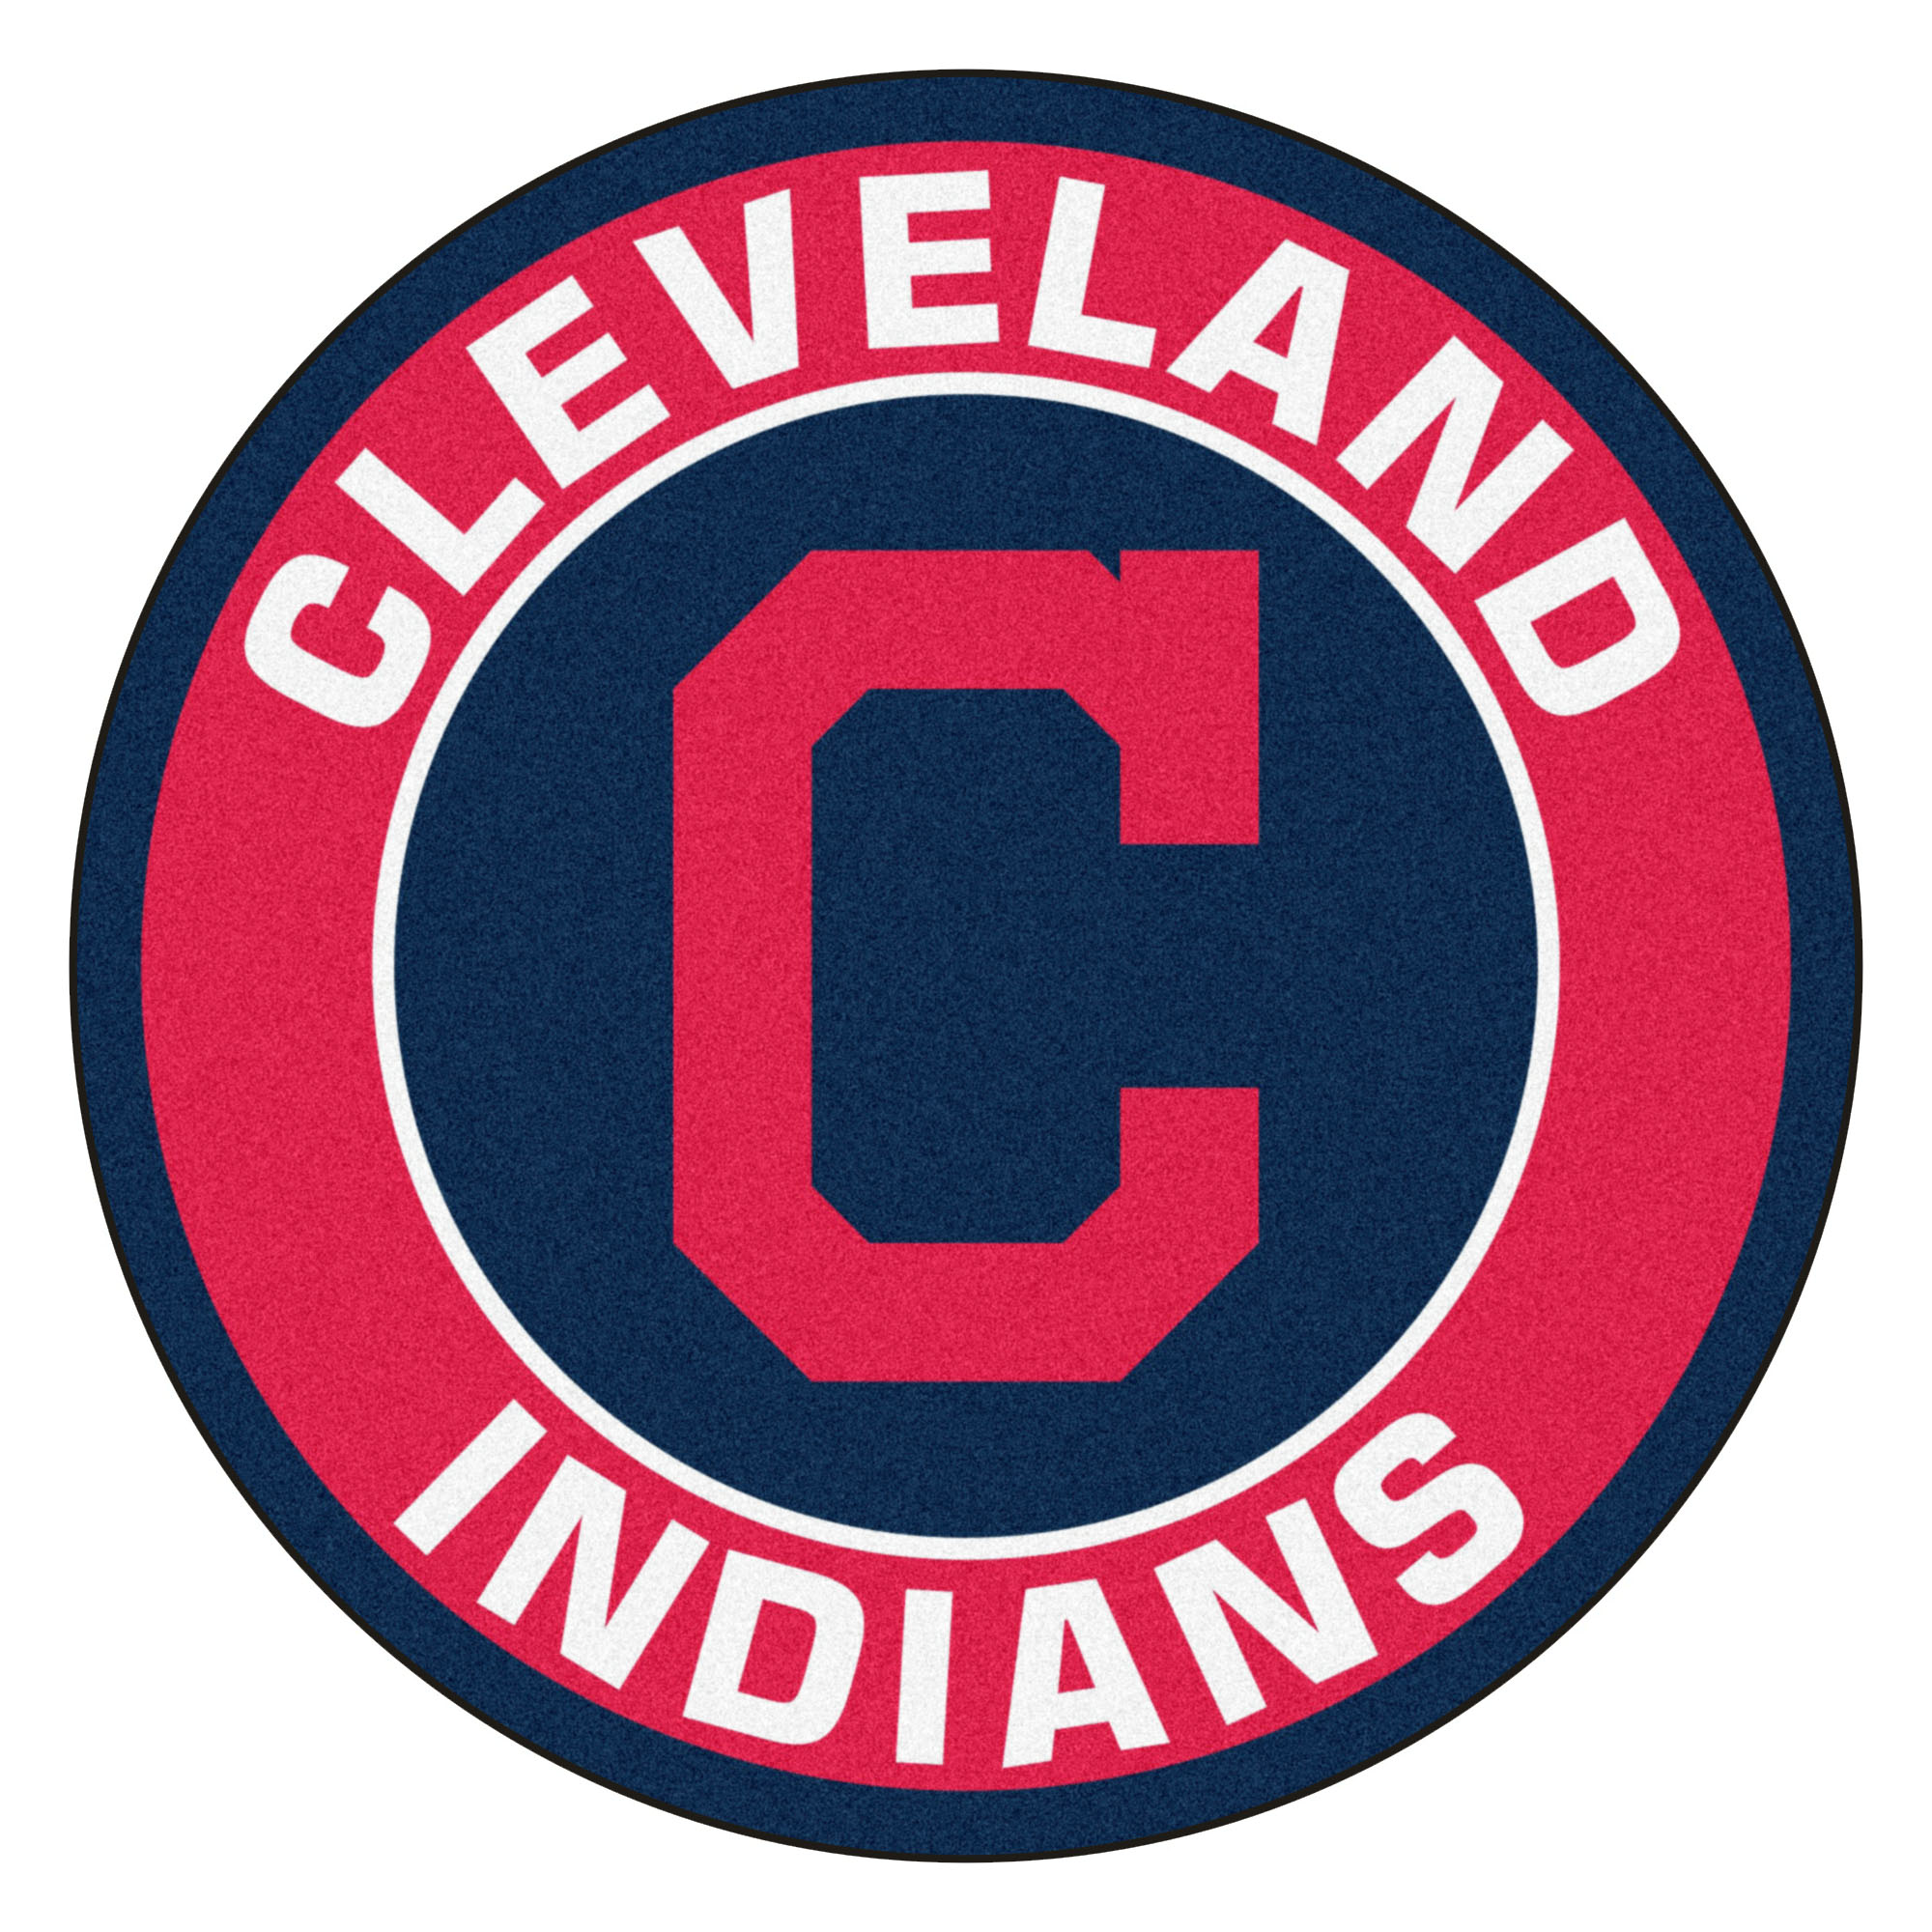 Presale Codes to purchase tickets for Cleveland Indians 2016 Postseason games